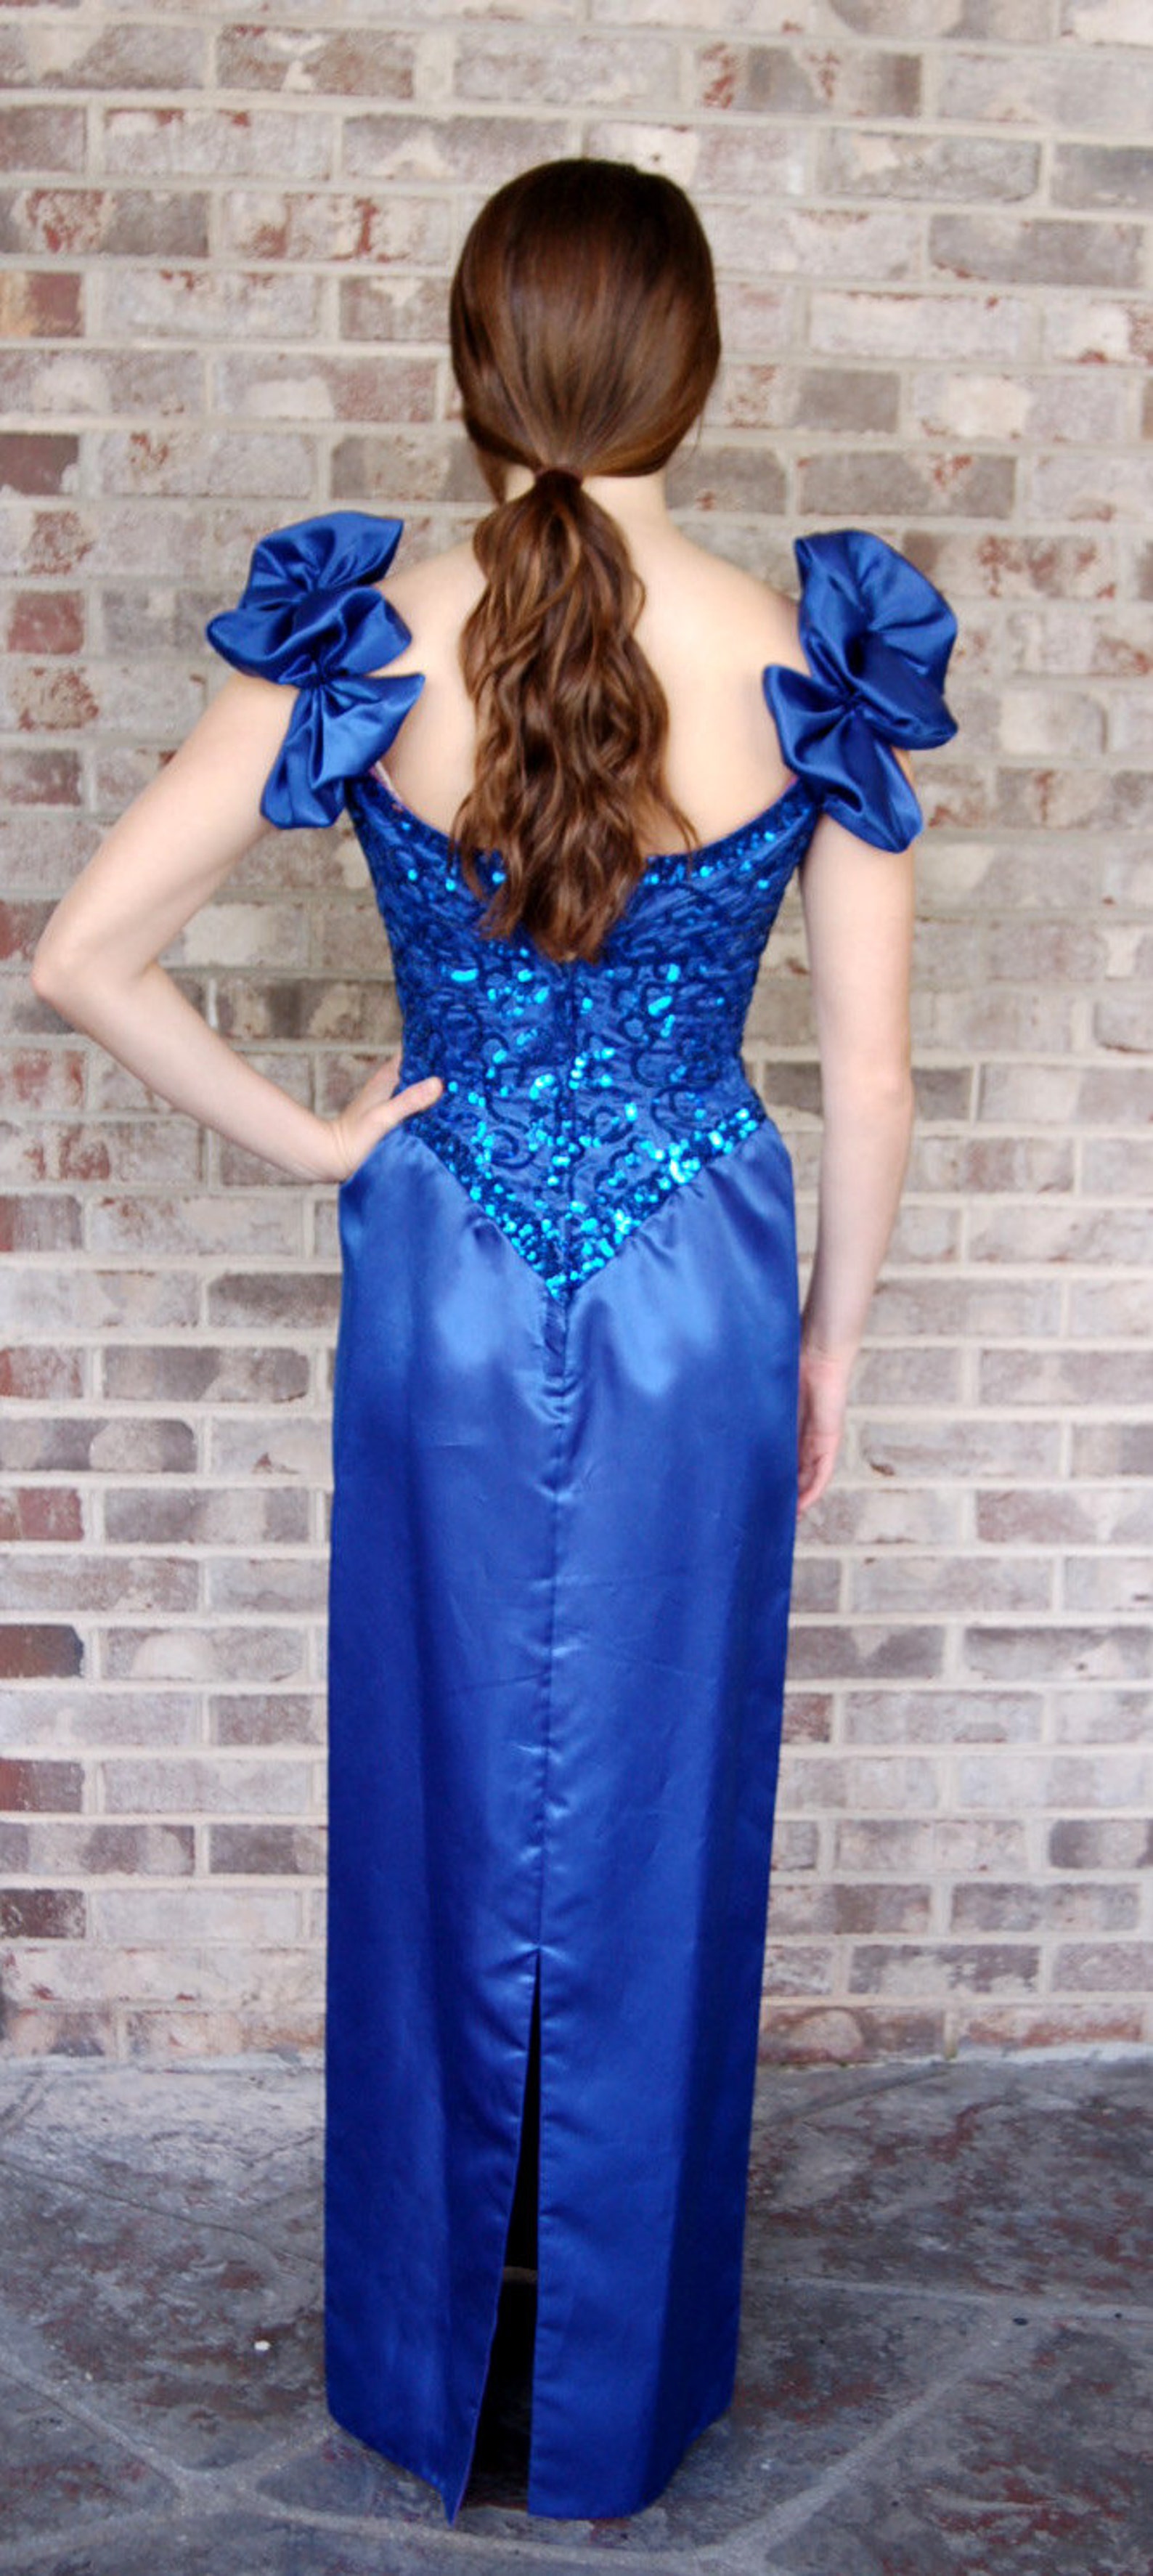 1980s Gown Mike Benet Dress Blue Satin and Sequins Sheath - Etsy